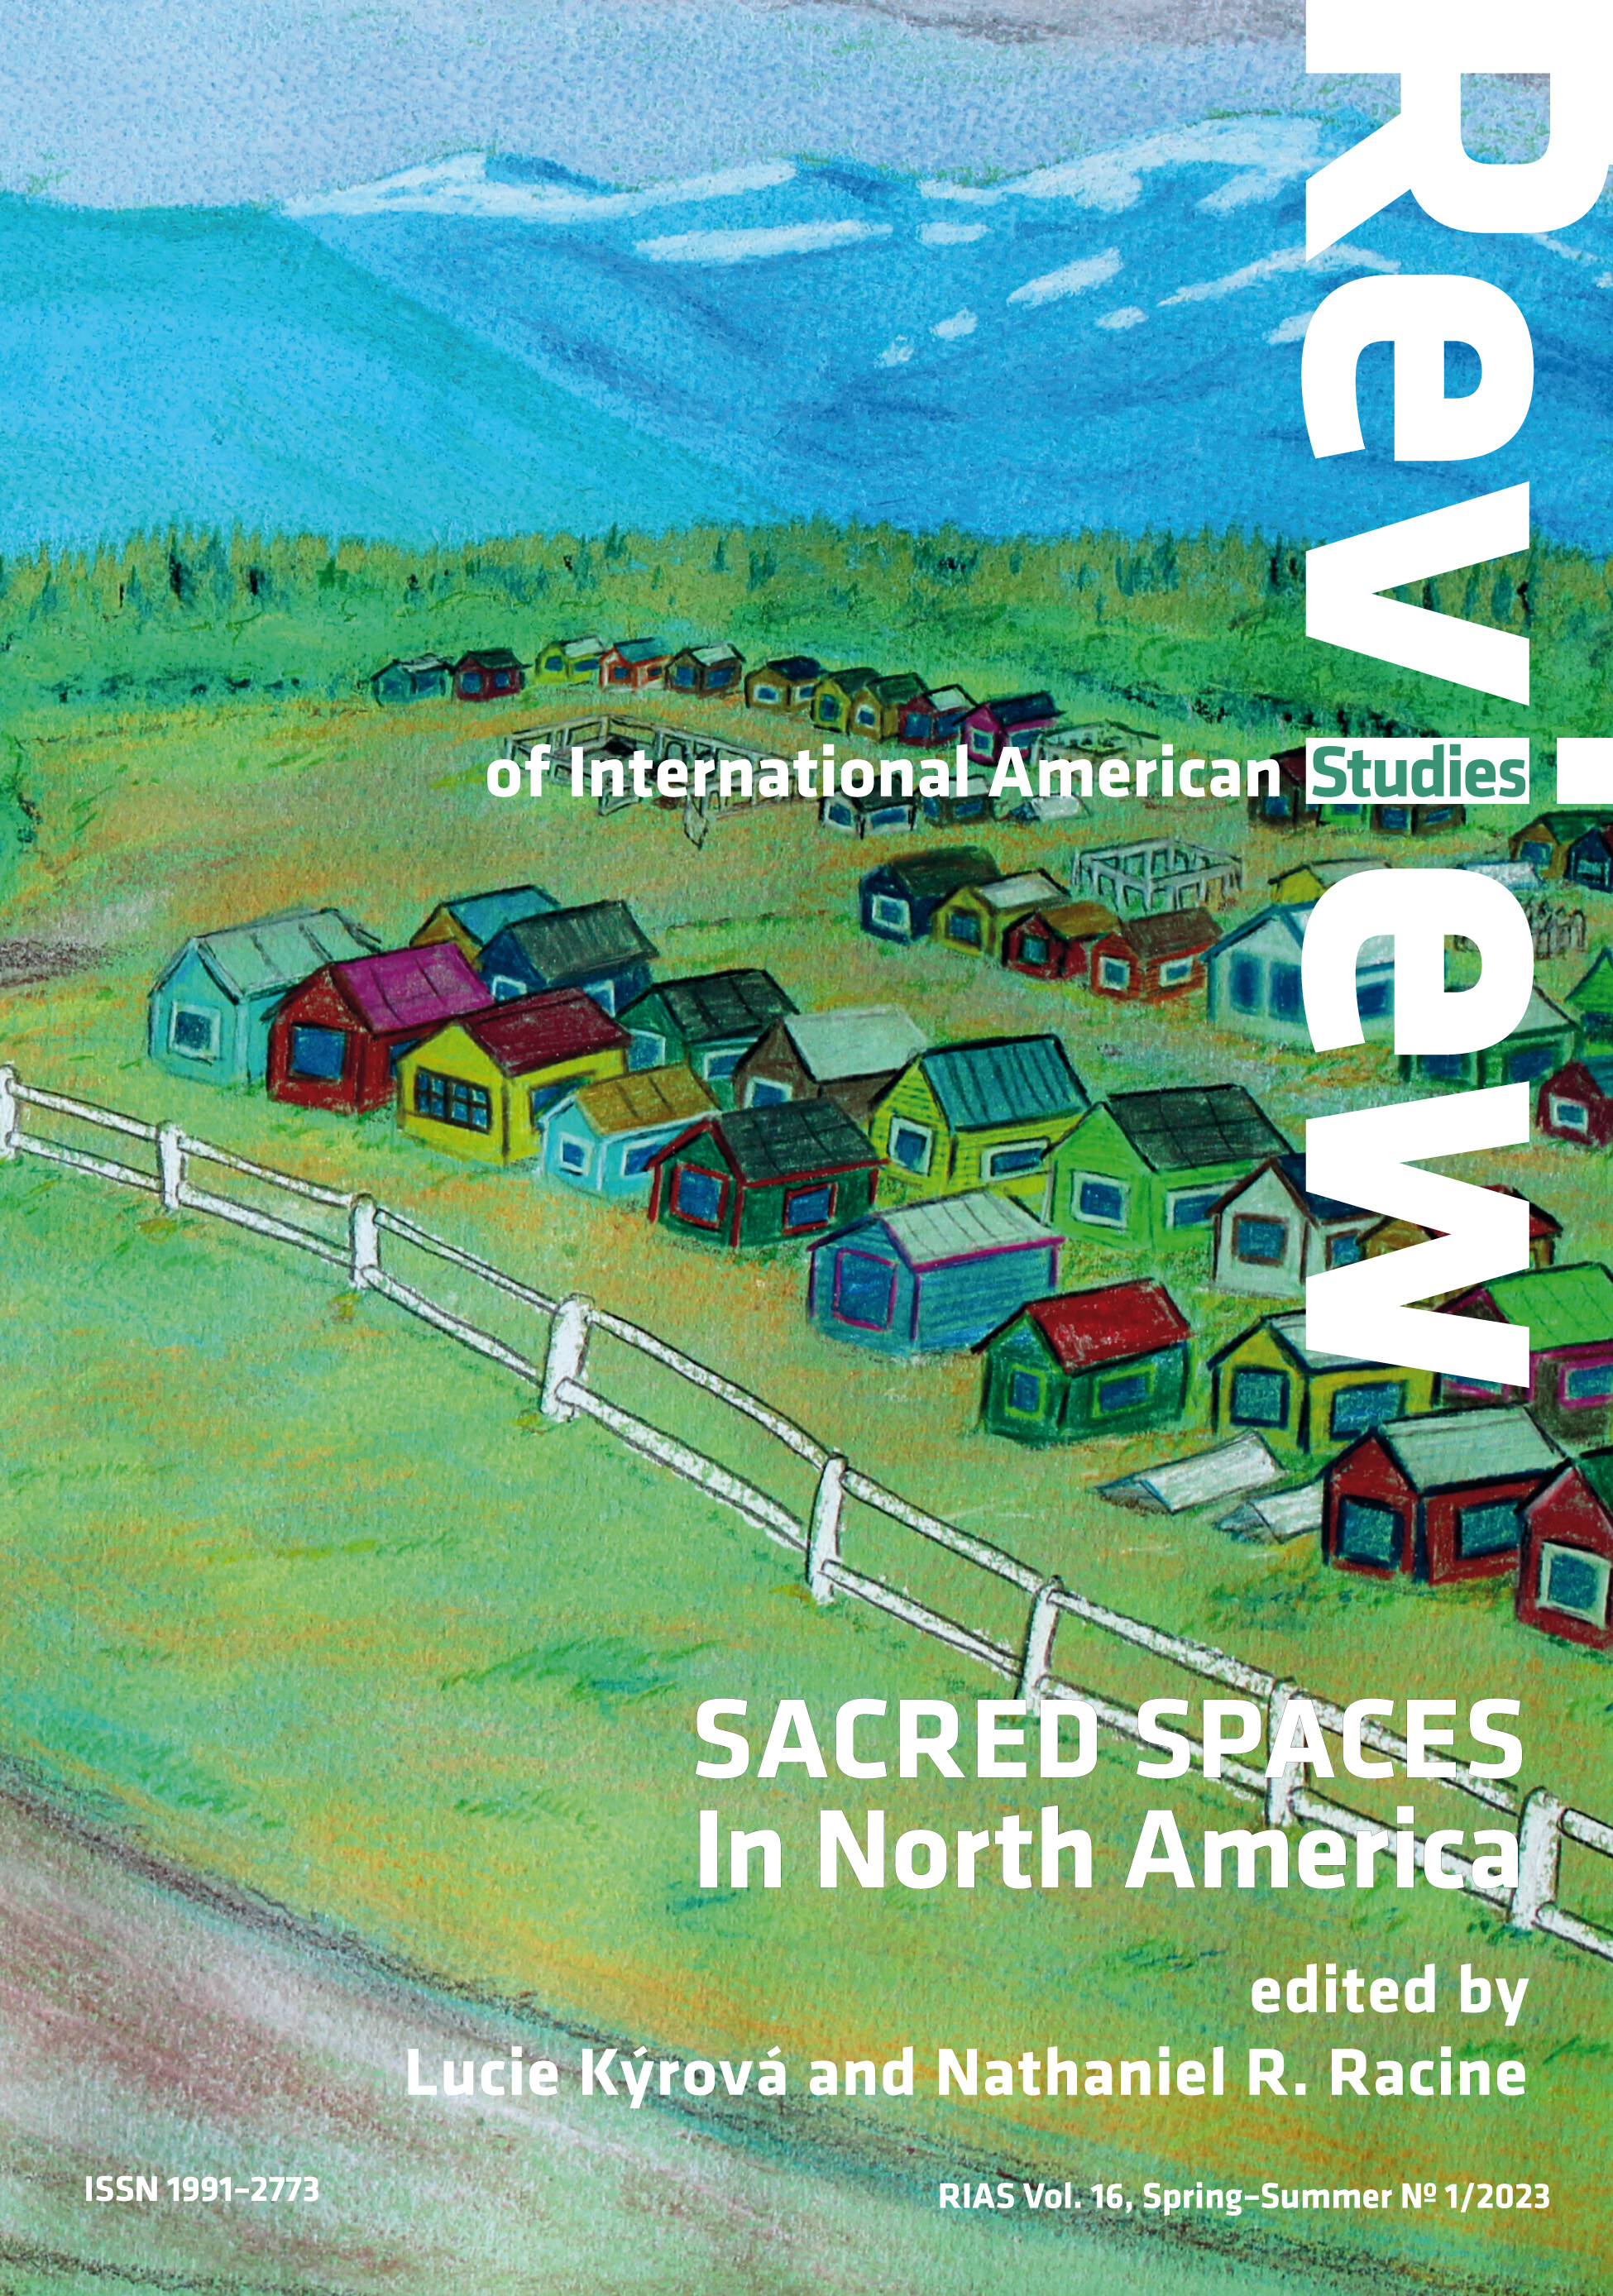 REINTERPRETATION OF ‘SACRED SPACE’ AT THE NEWARK EARTHWORKS AND SERPENT MOUND: Settler Colonialism and Discourses of ‘Sacred’ Cover Image